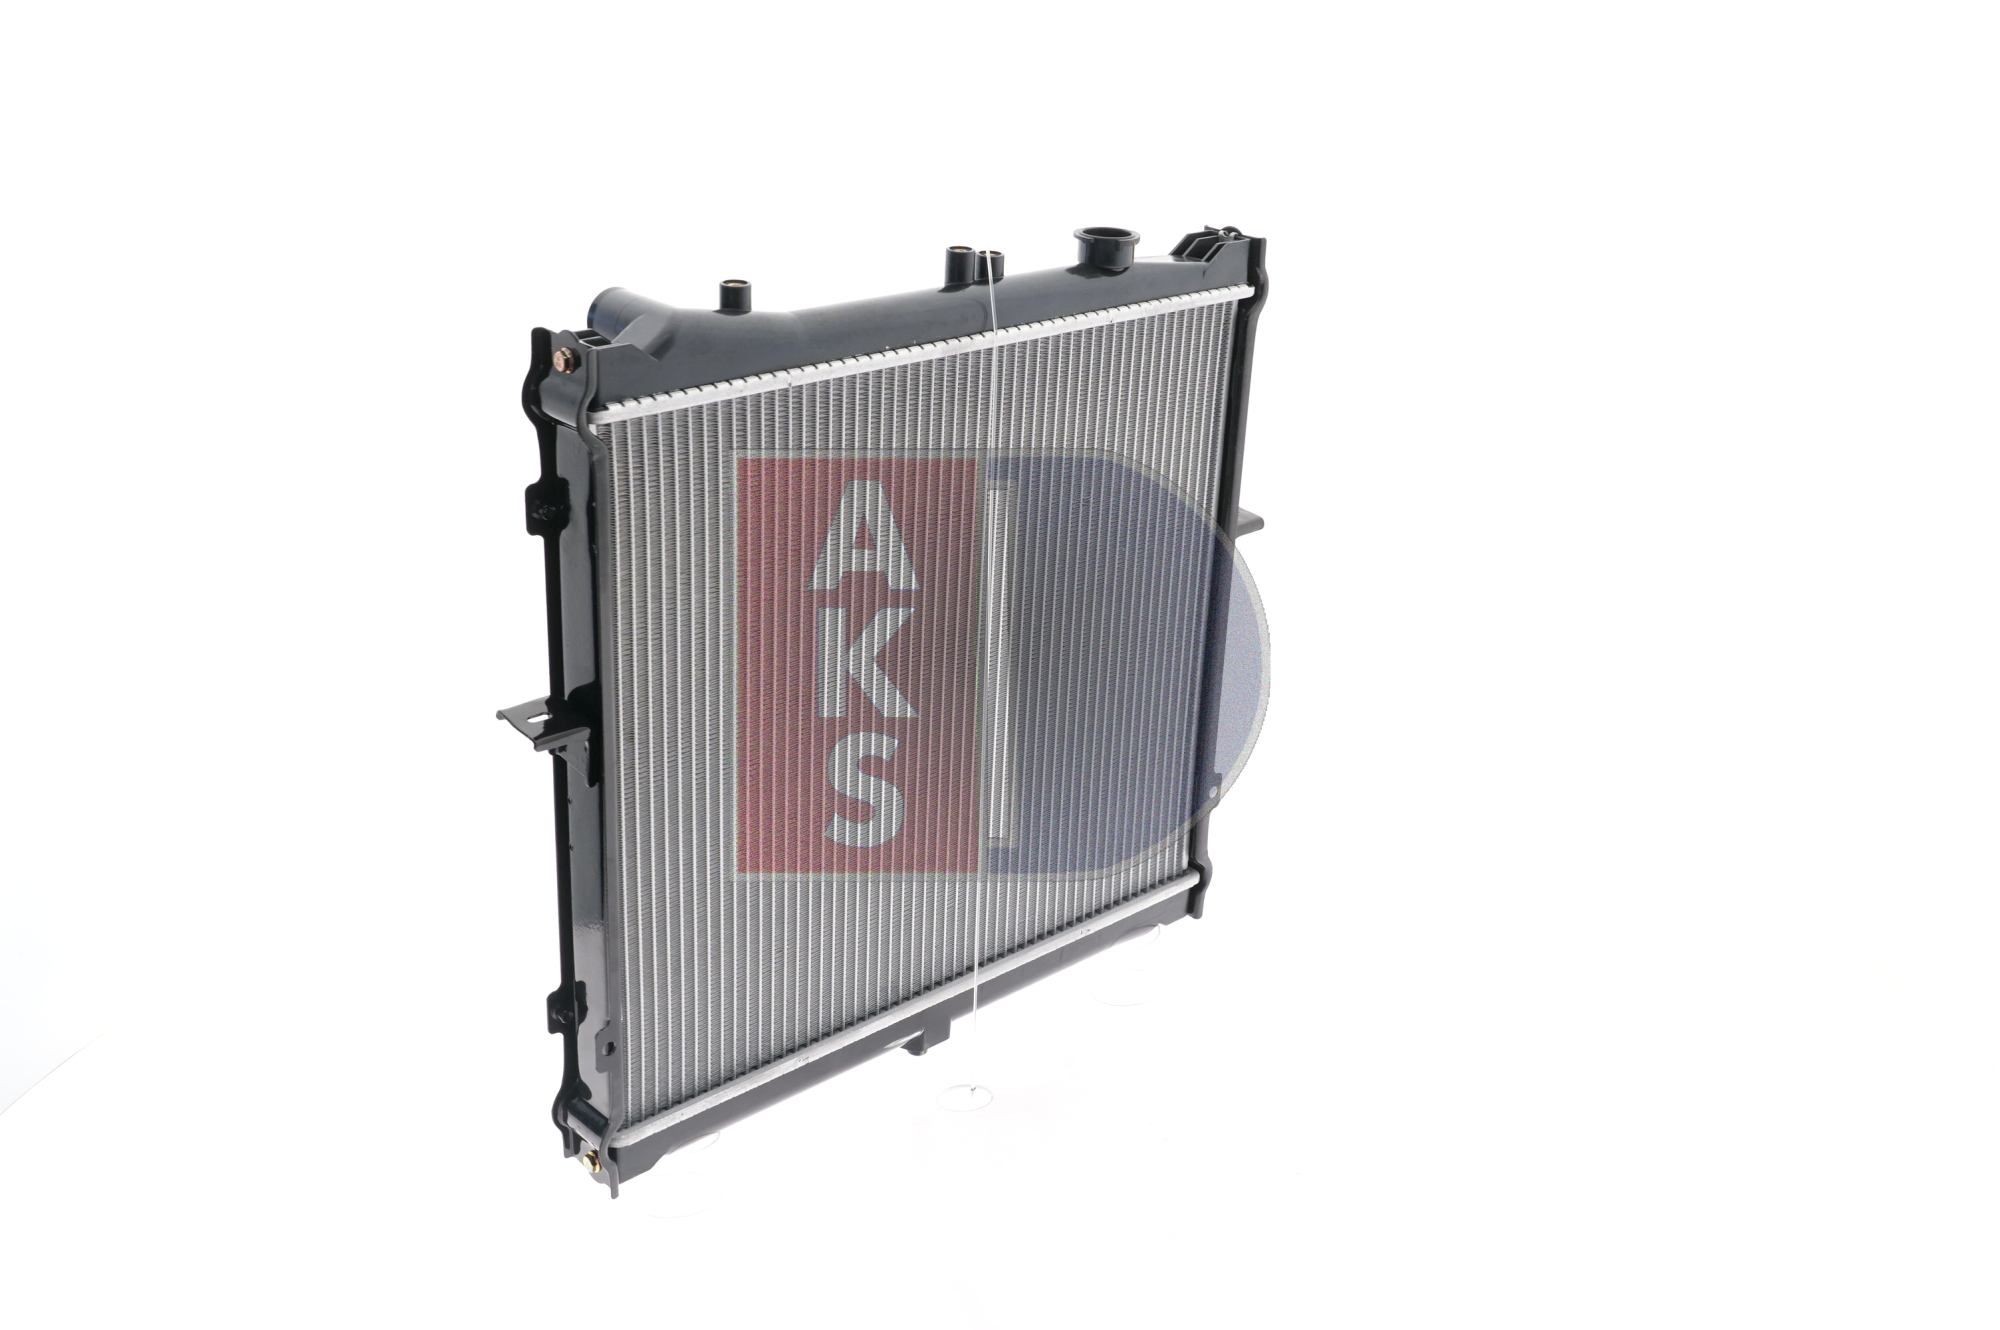 510130N Radiator 510130N AKS DASIS for vehicles with/without air conditioning, 450 x 524 x 28 mm, Manual Transmission, Brazed cooling fins